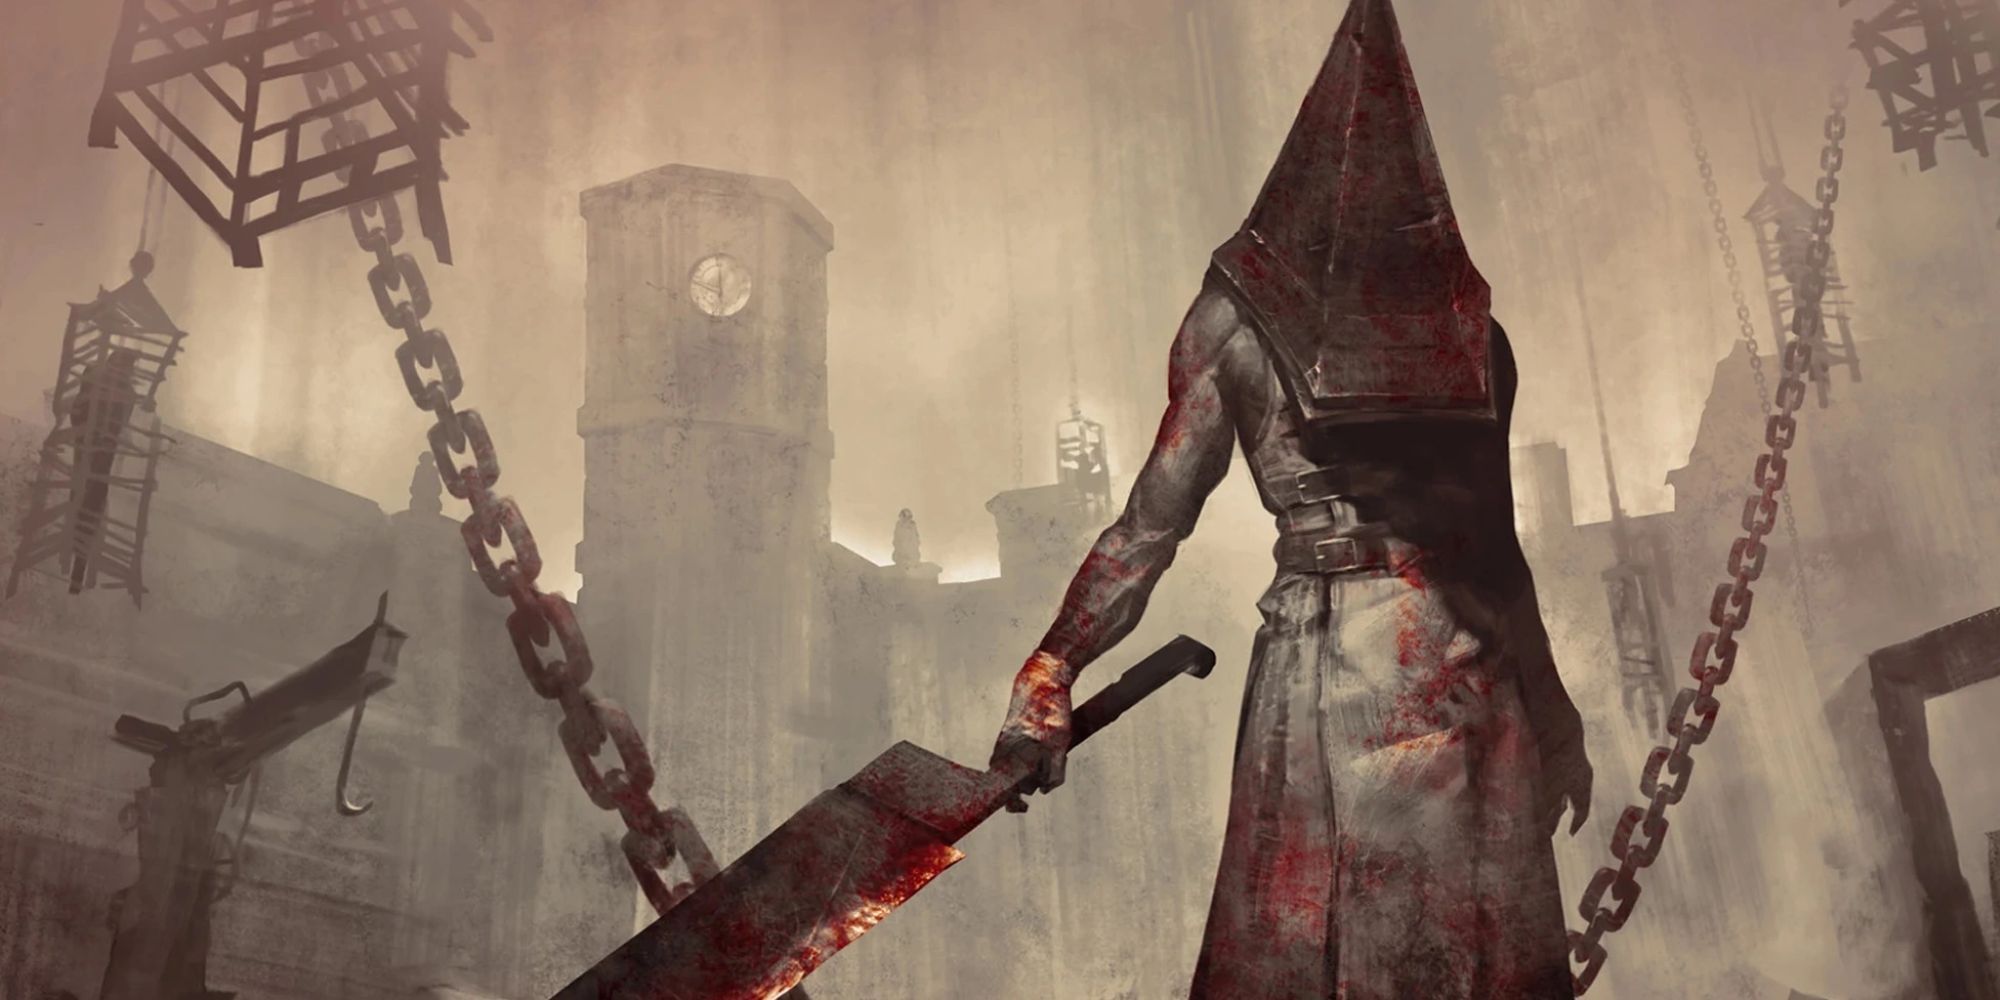 Pyramid Head with large weapon in a dreary landscape